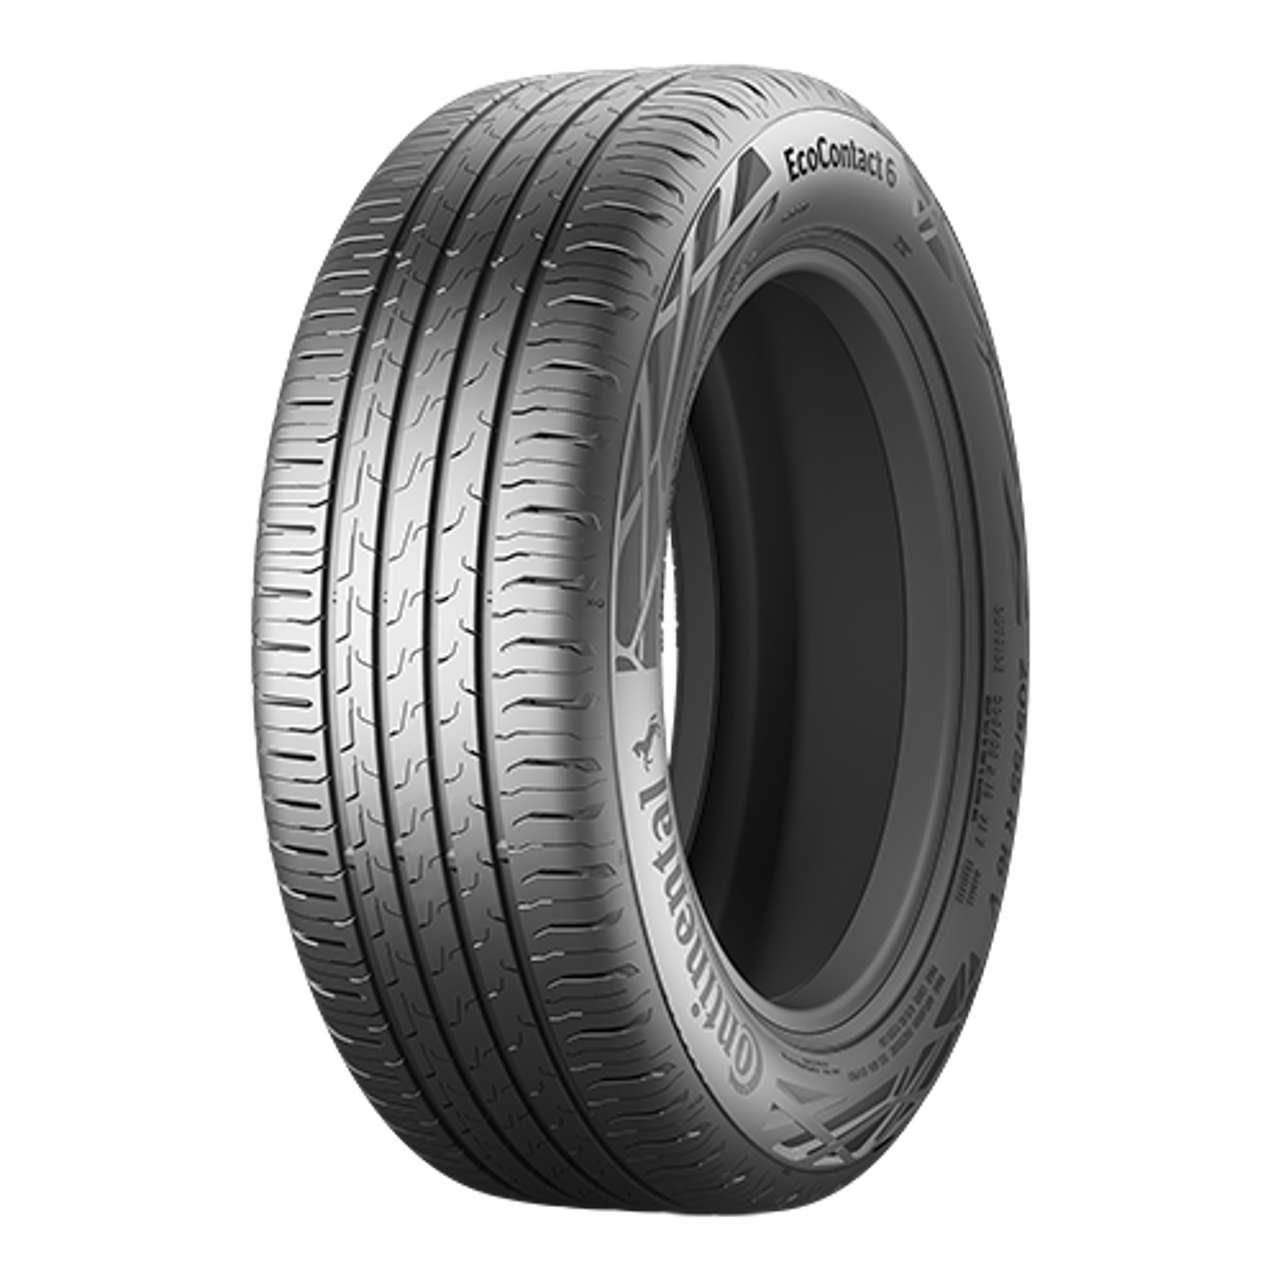 CONTINENTAL ECOCONTACT 6 (EVc) 185/65R15 88H